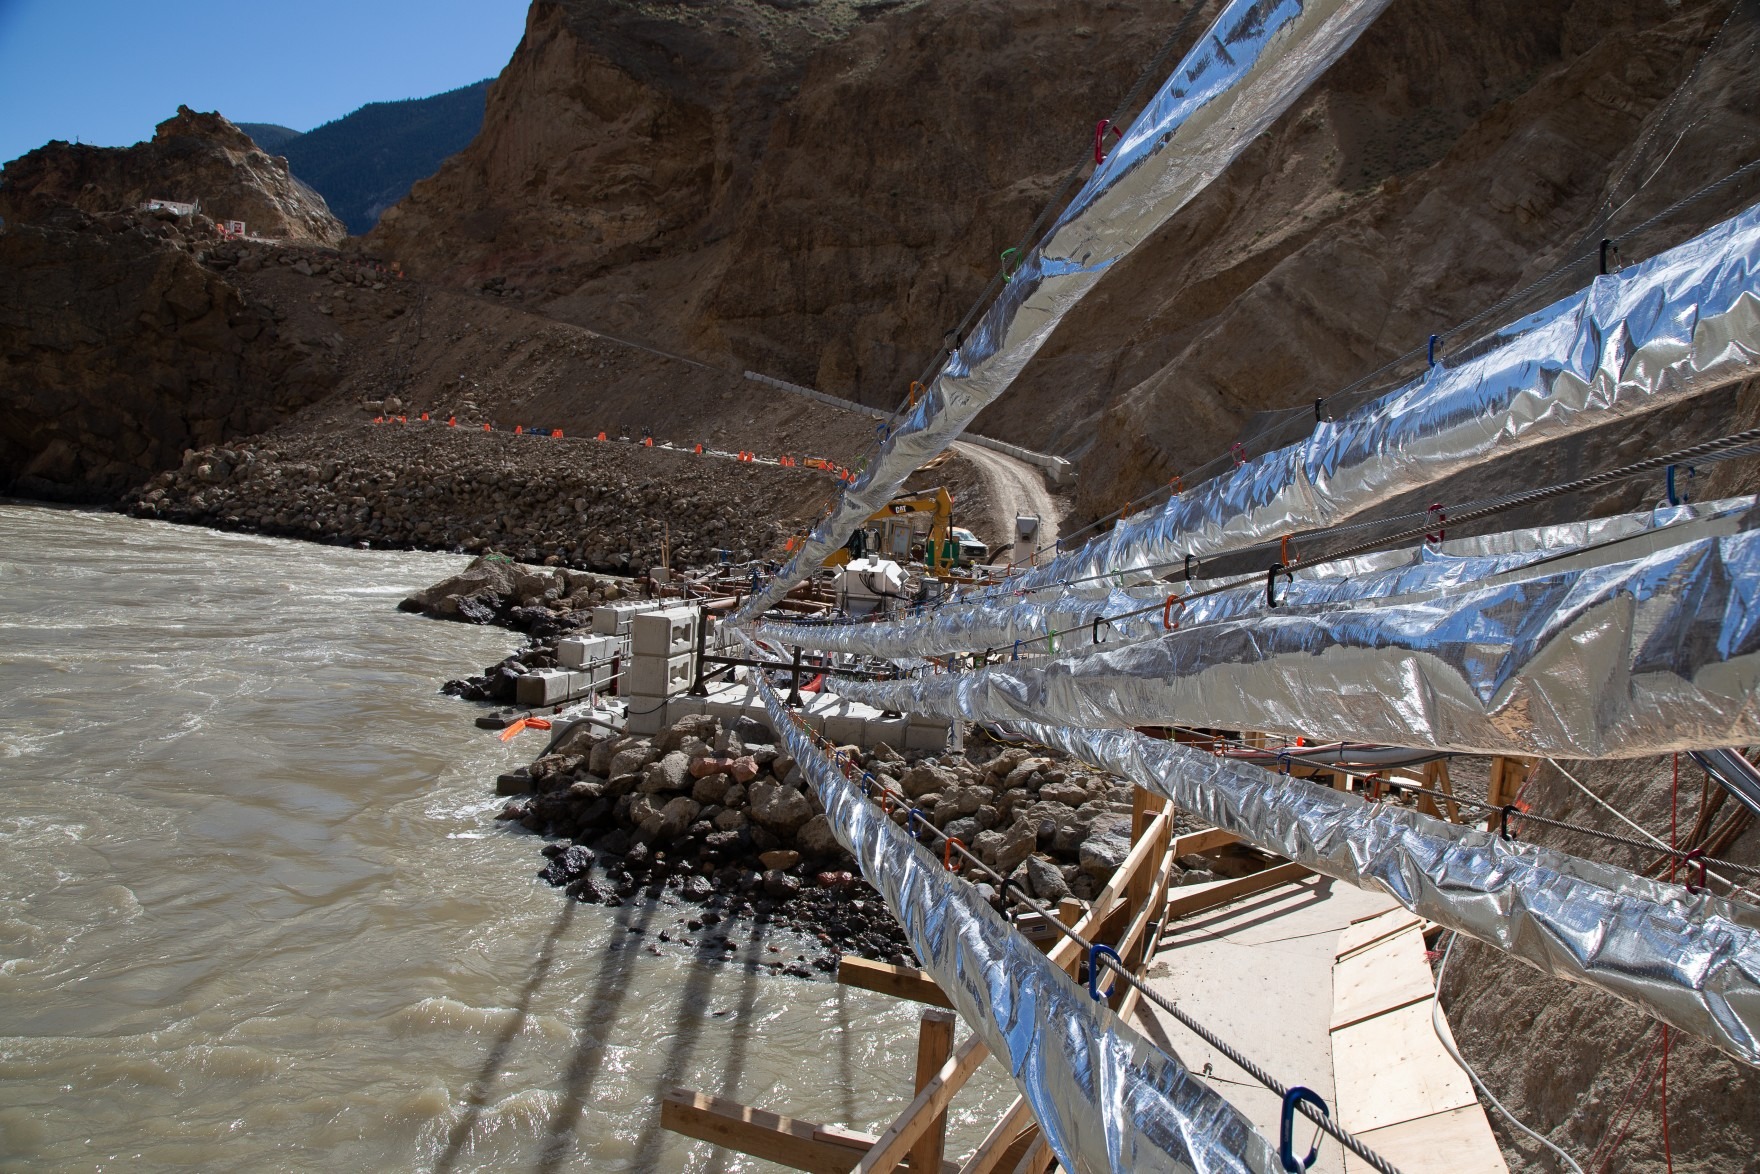 A fish passage technology developed by Whooshh Innovations transported 8,200 salmon around a massive landslide on the Fraser River in a remote part of British Columbia.